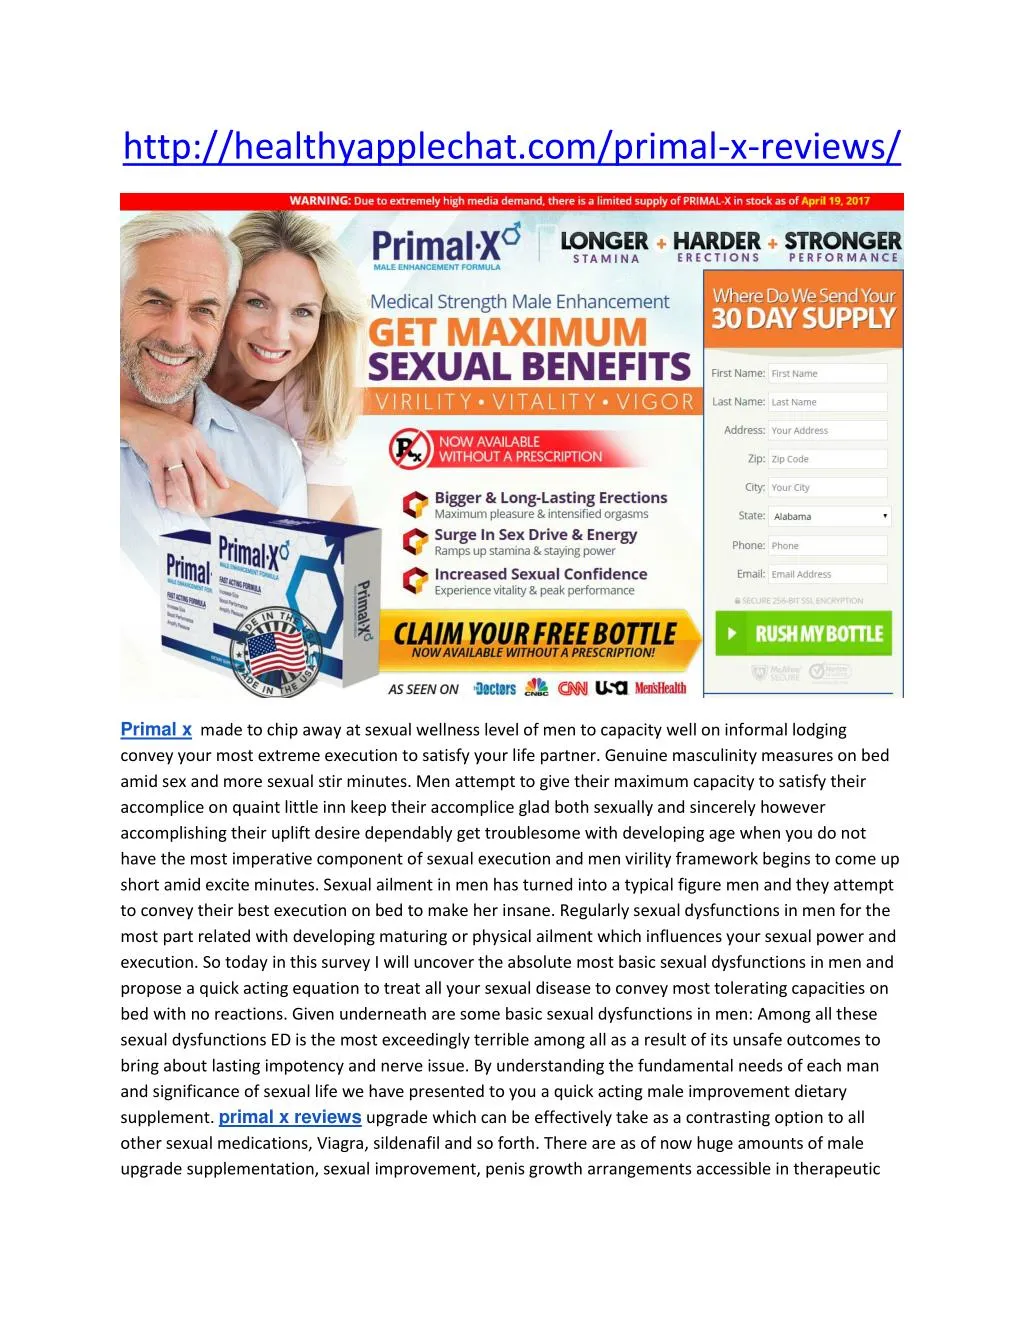 http healthyapplechat com primal x reviews